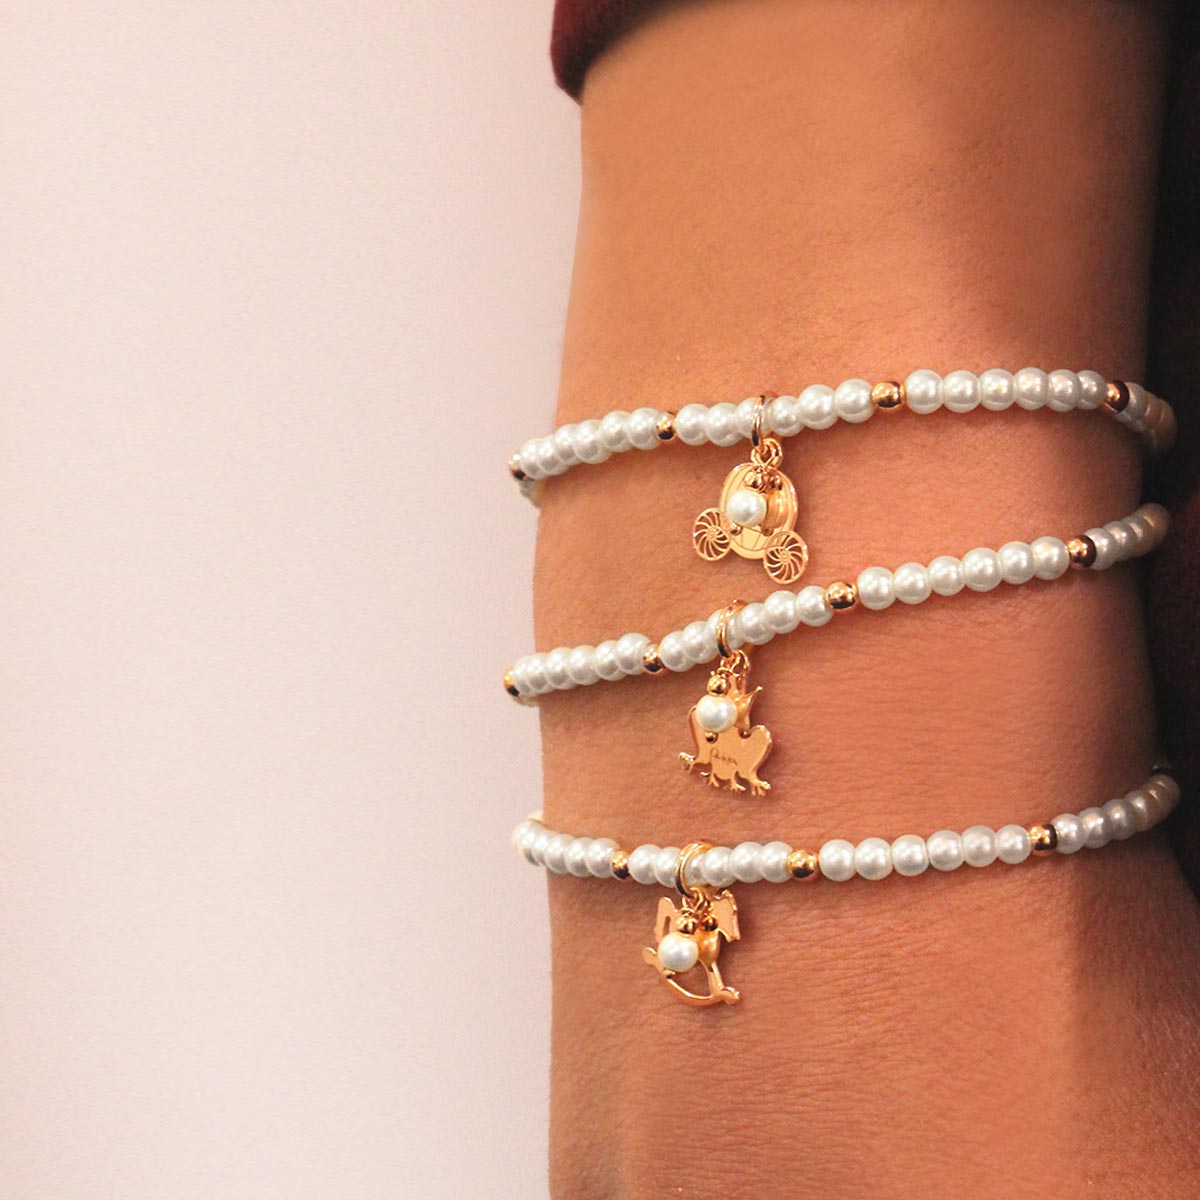 Elastic bracelet with pearls and balls - FROG